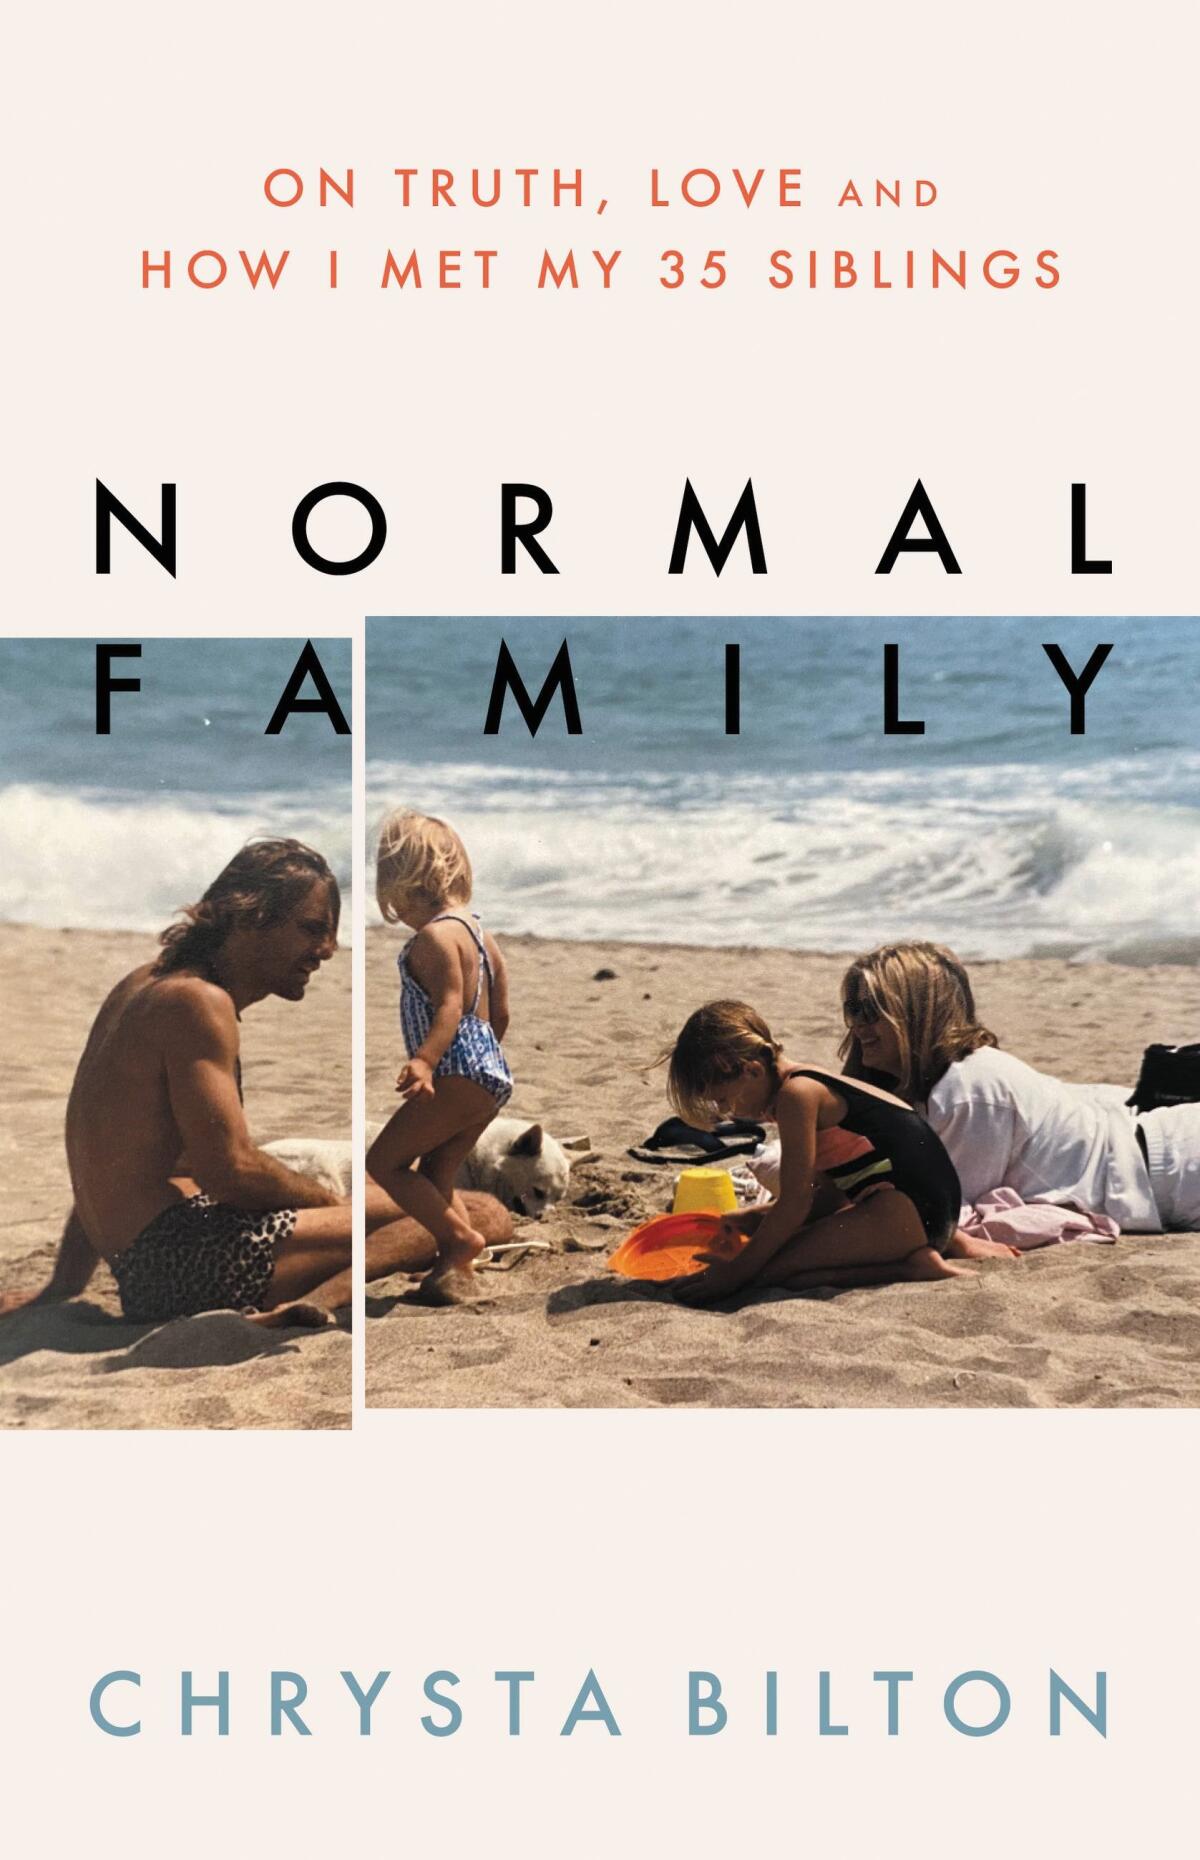 "Normal Family: On Truth, Love and How I Met My 35 Siblings" by Chrysta Bilton